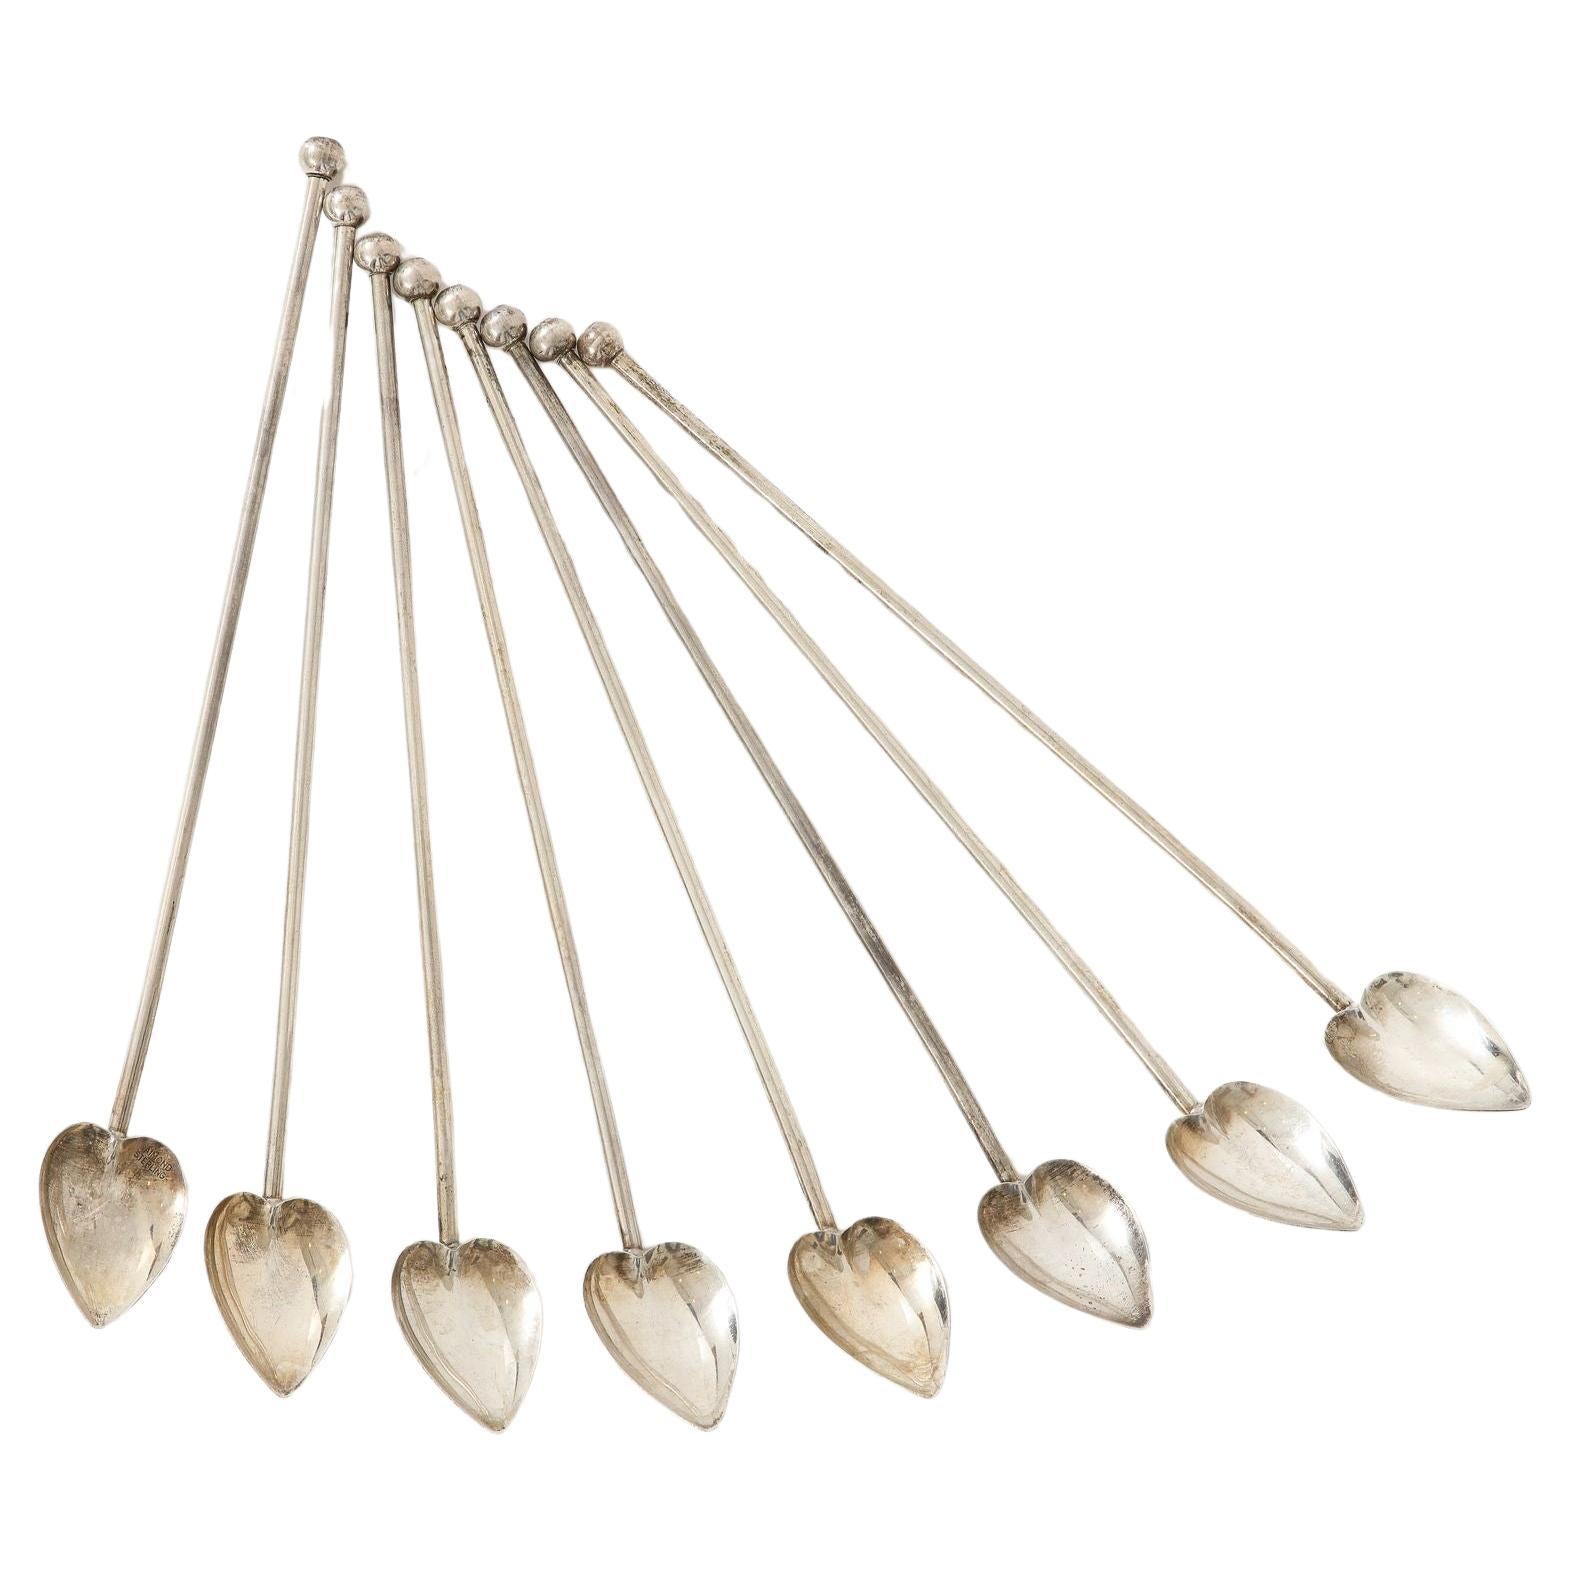 8 Sterling Silver Cocktail Heart Shaped Spoons/Straws For Sale